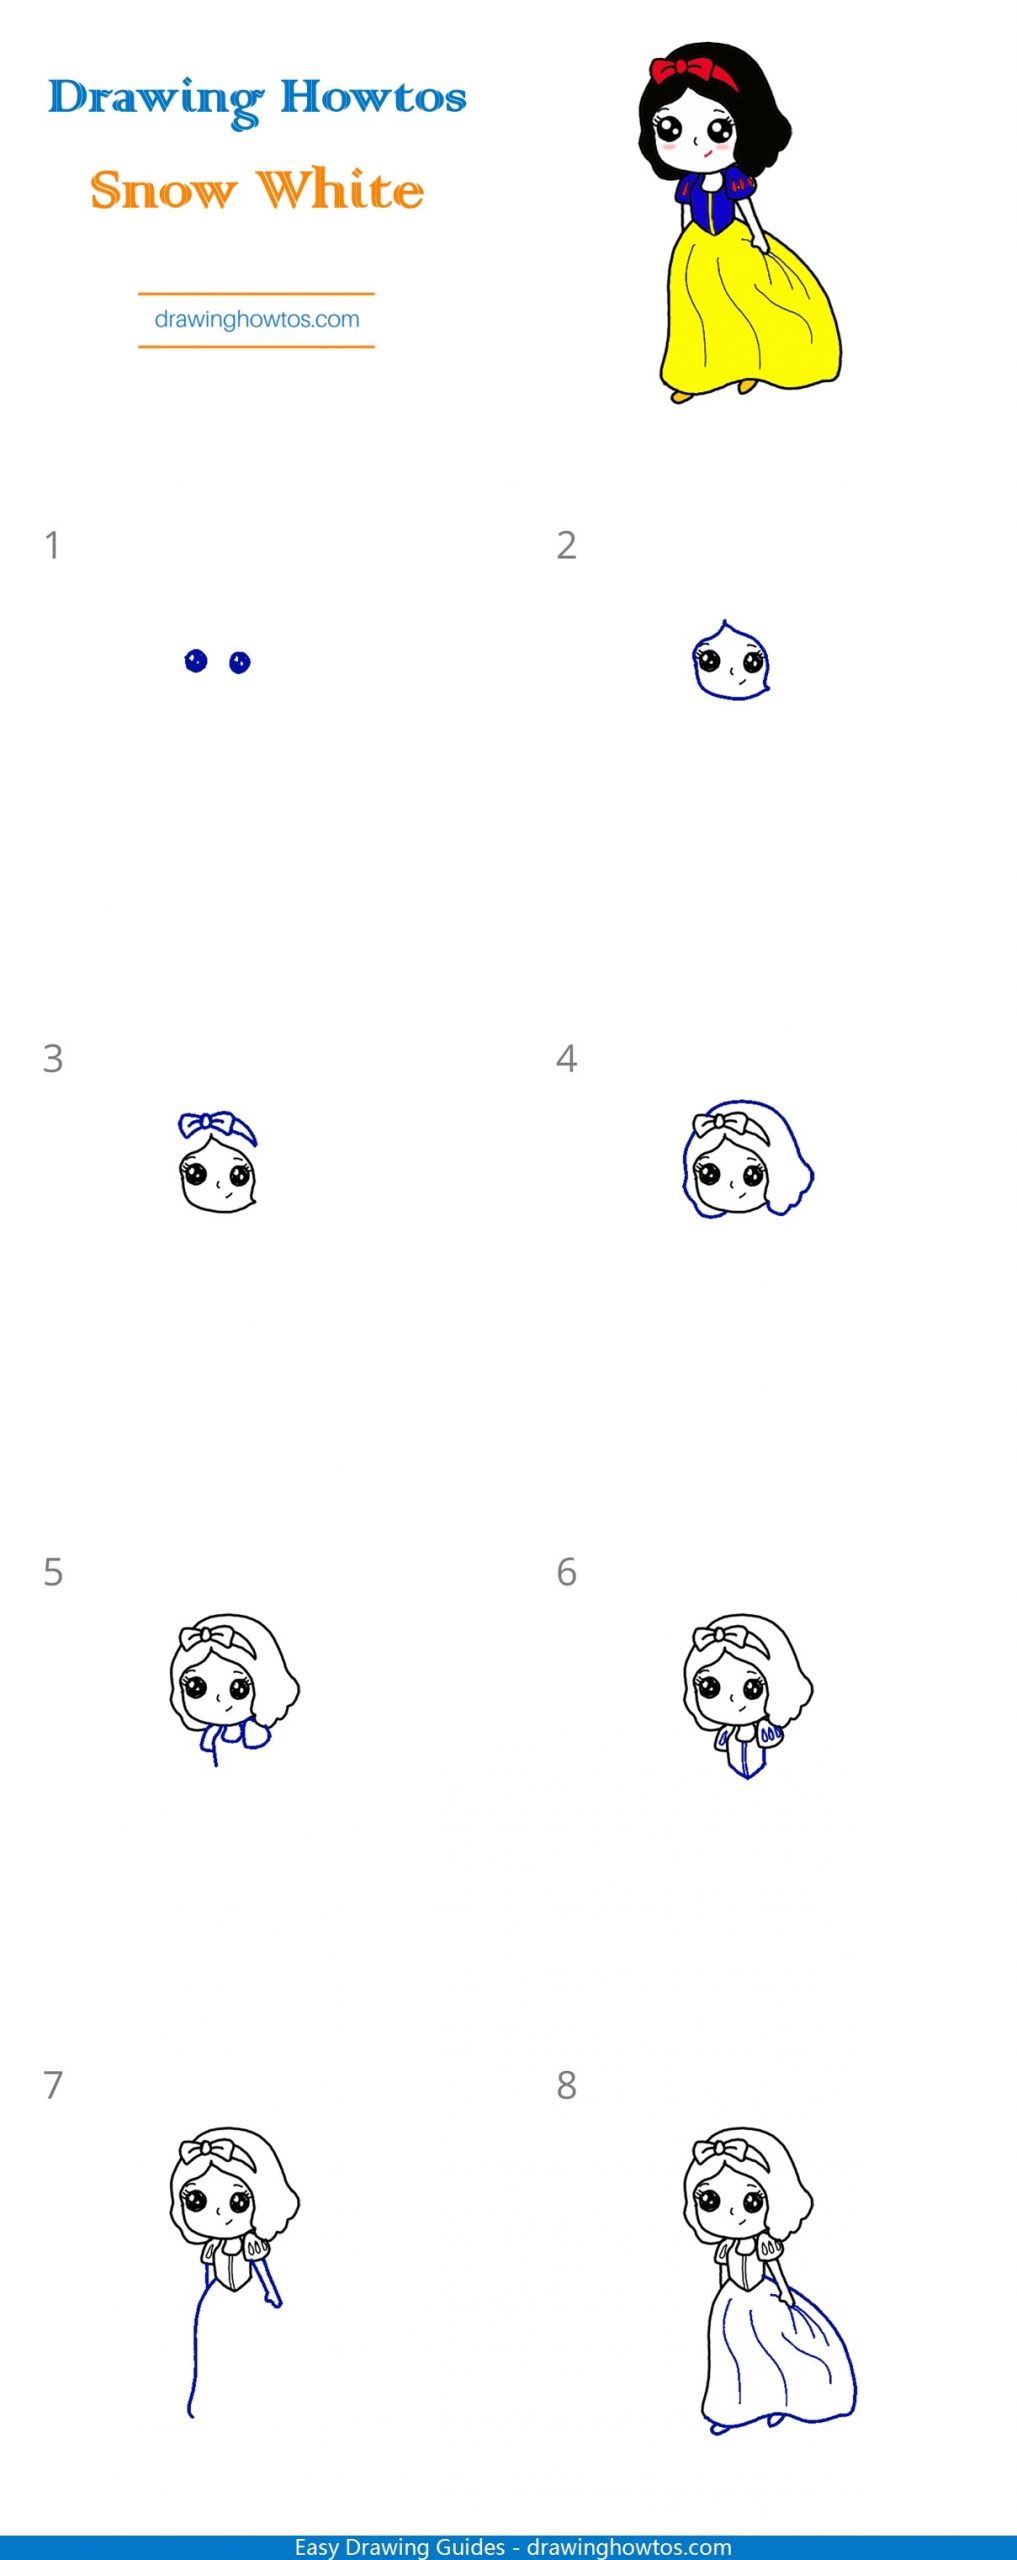 How to Draw Snow White Step by Step